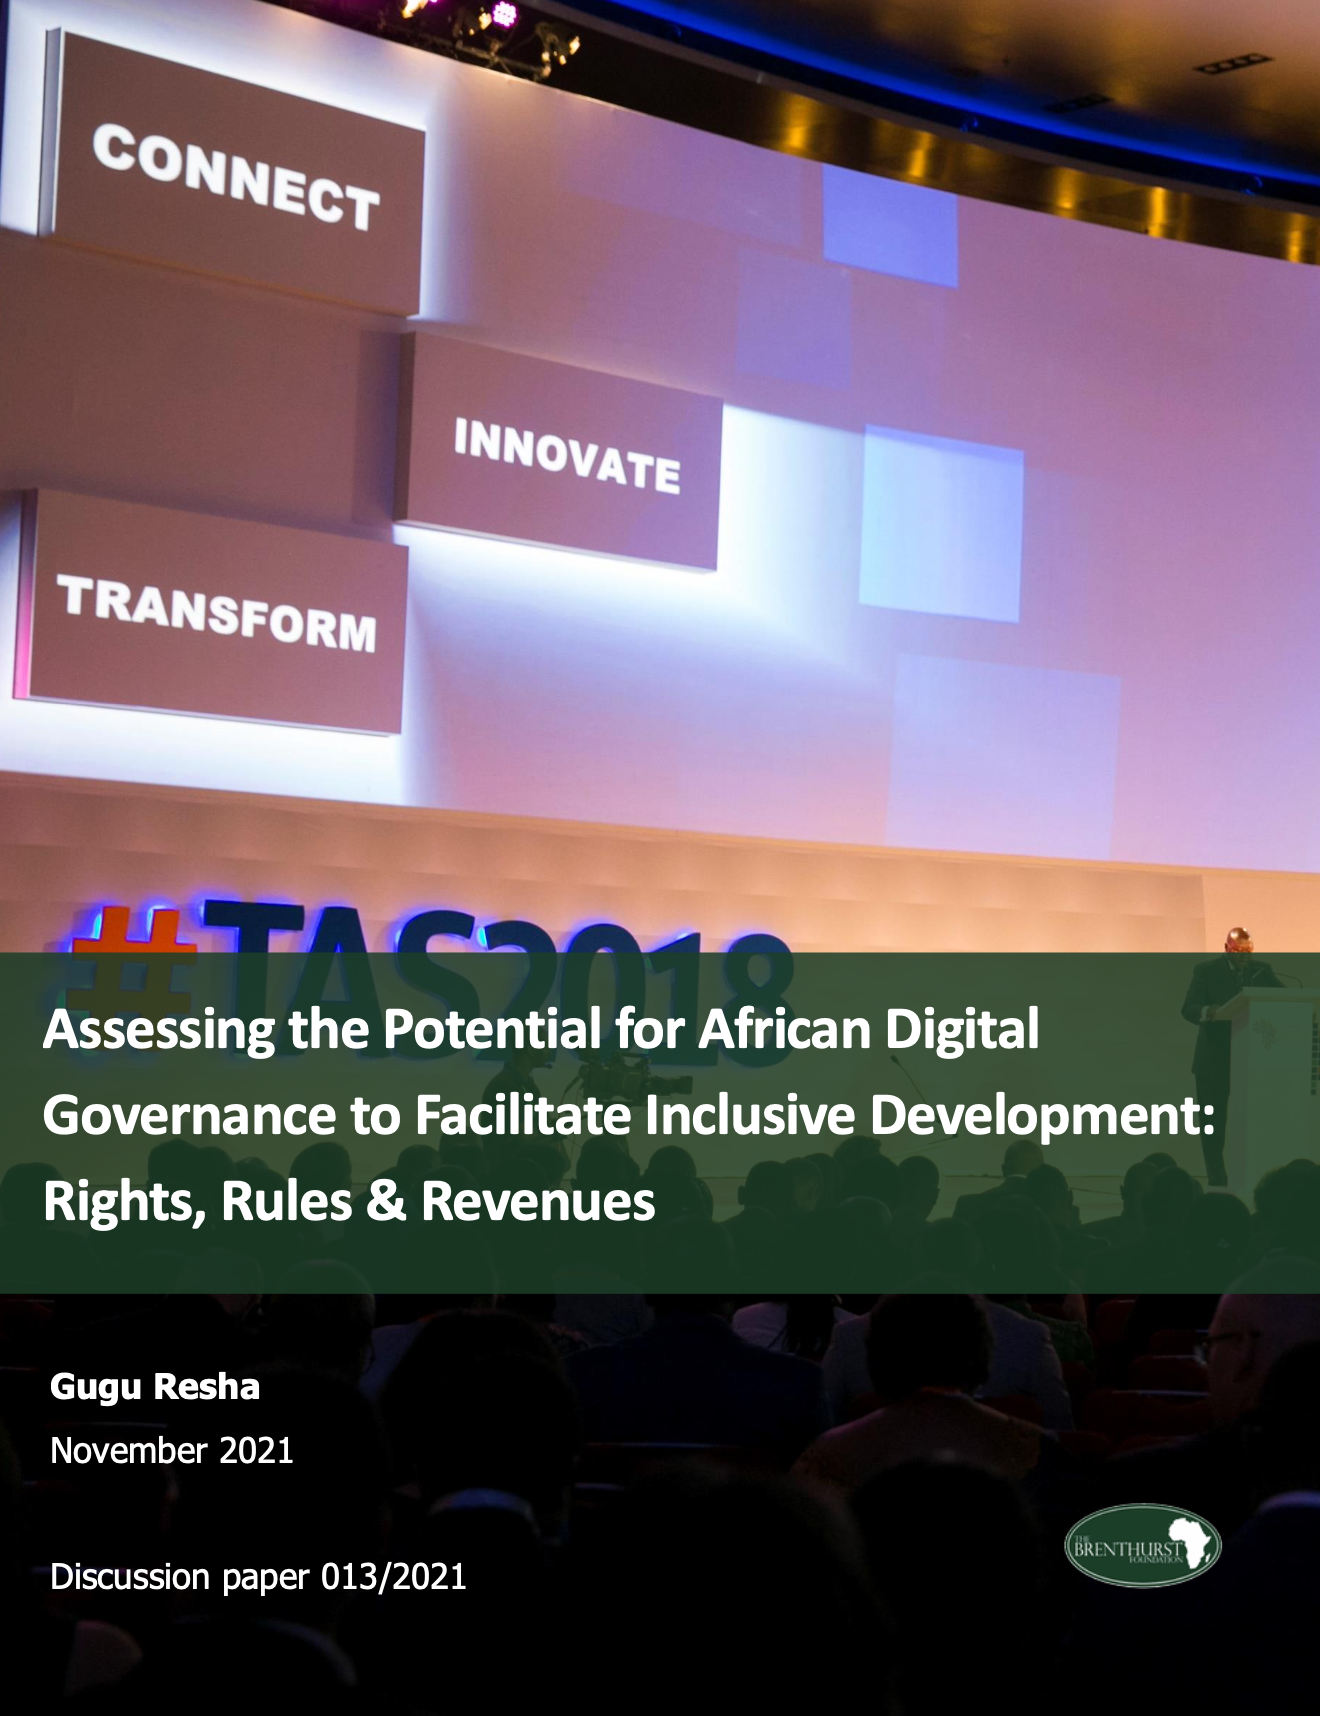 Assessing the Potential for African Digital Governance to Facilitate Inclusive Development: Rights, Rules & Revenues